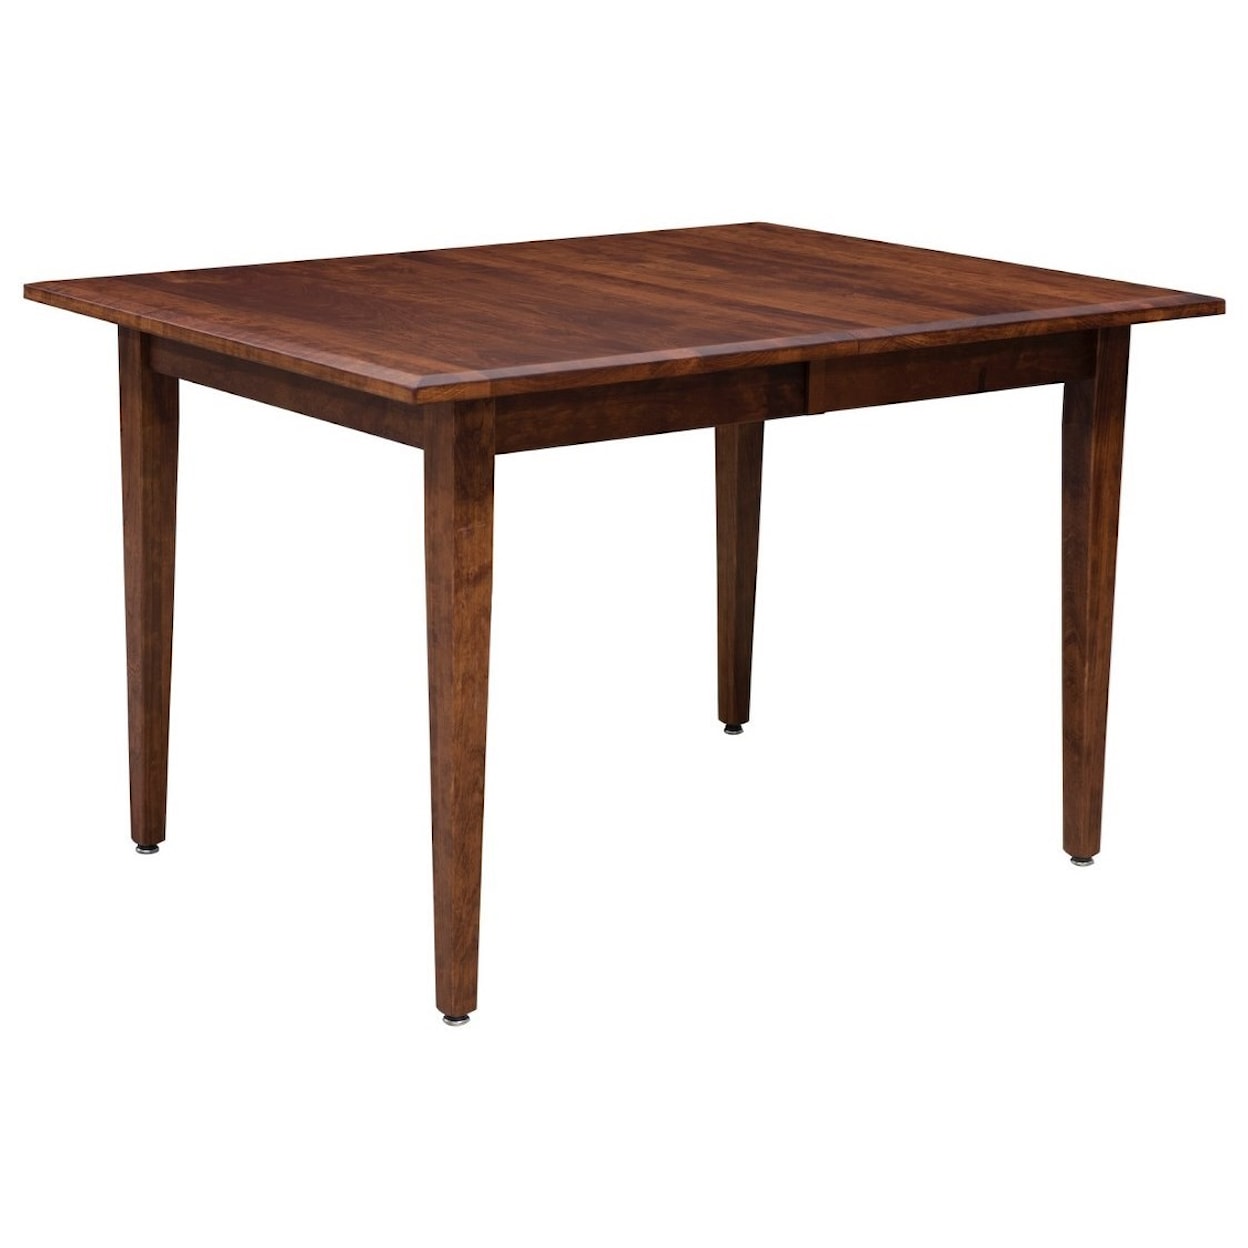 Trailway Wood Santa Monica Table and Chair Set